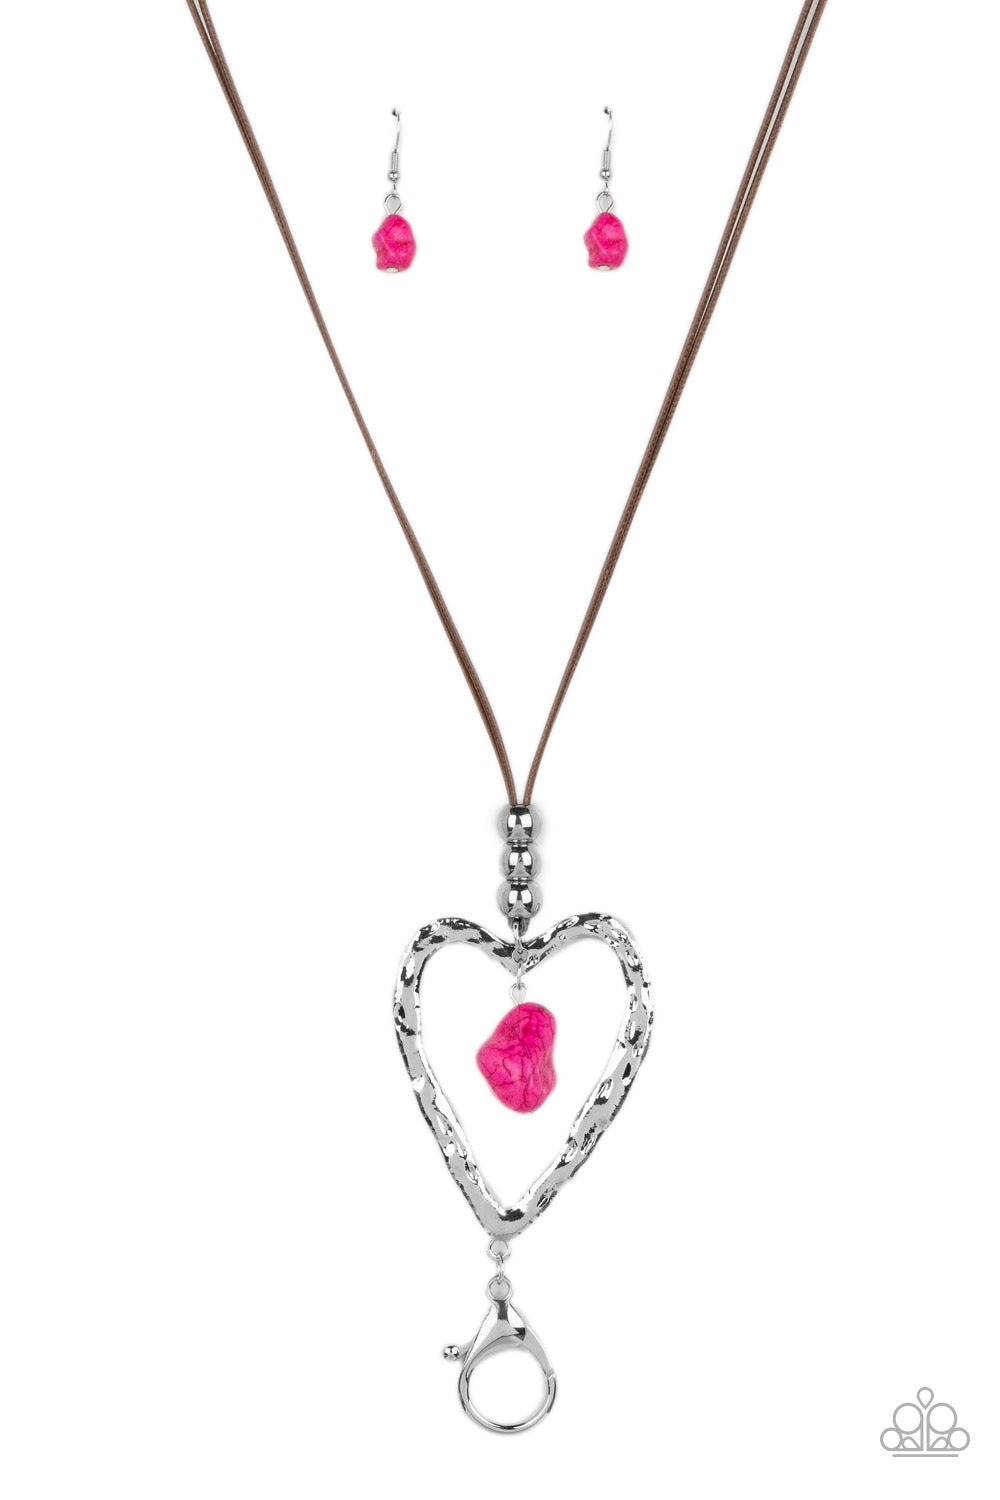 Paparazzi Santa Fe Sweetheart - Pink - Heart Silver Necklace - Paparazzi Jewelry Images 